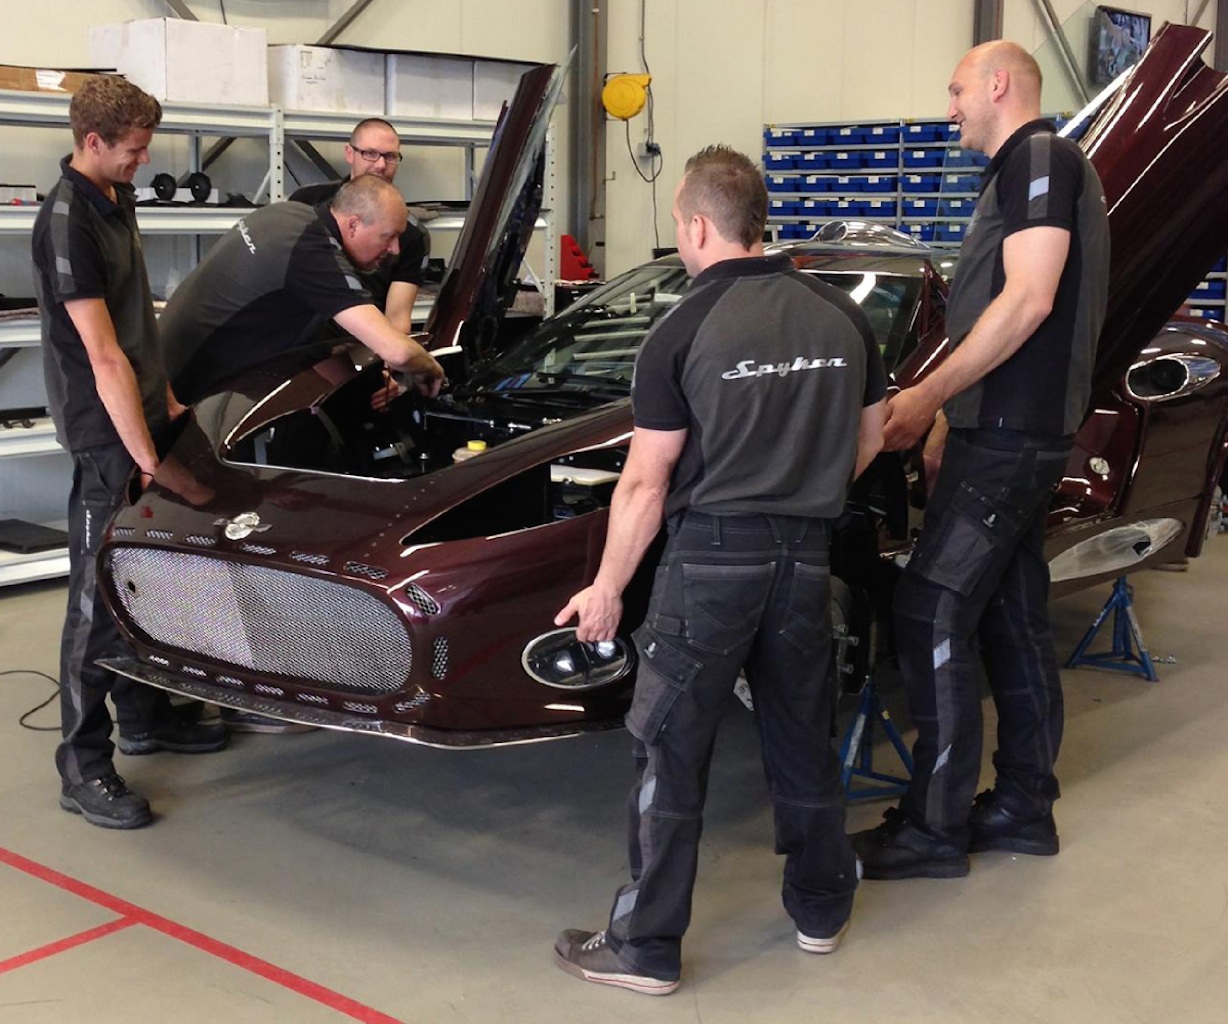 The custom vehicle being assembled by Spyker colleagues